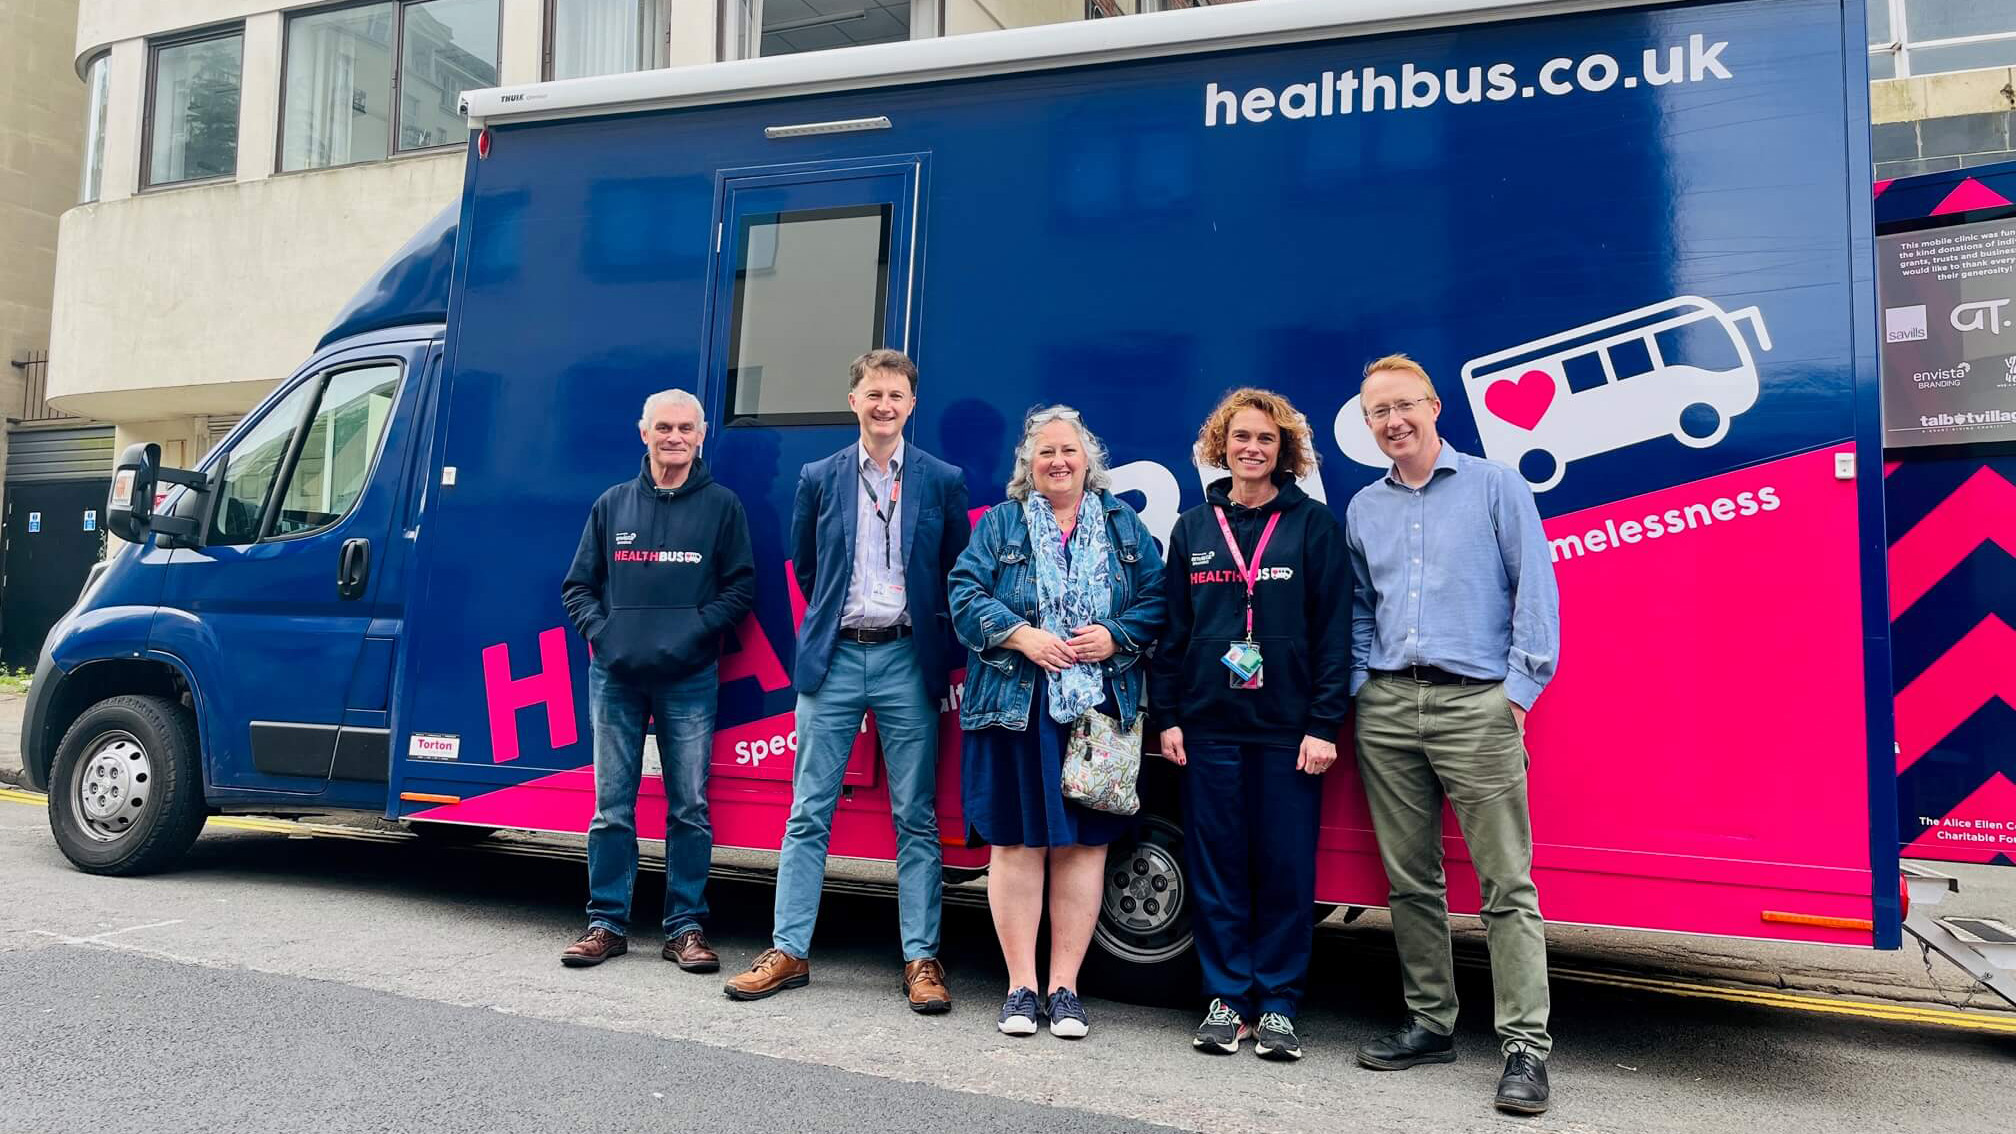 Three men and two women stand smiling in front of a blue van labelled Healthbus